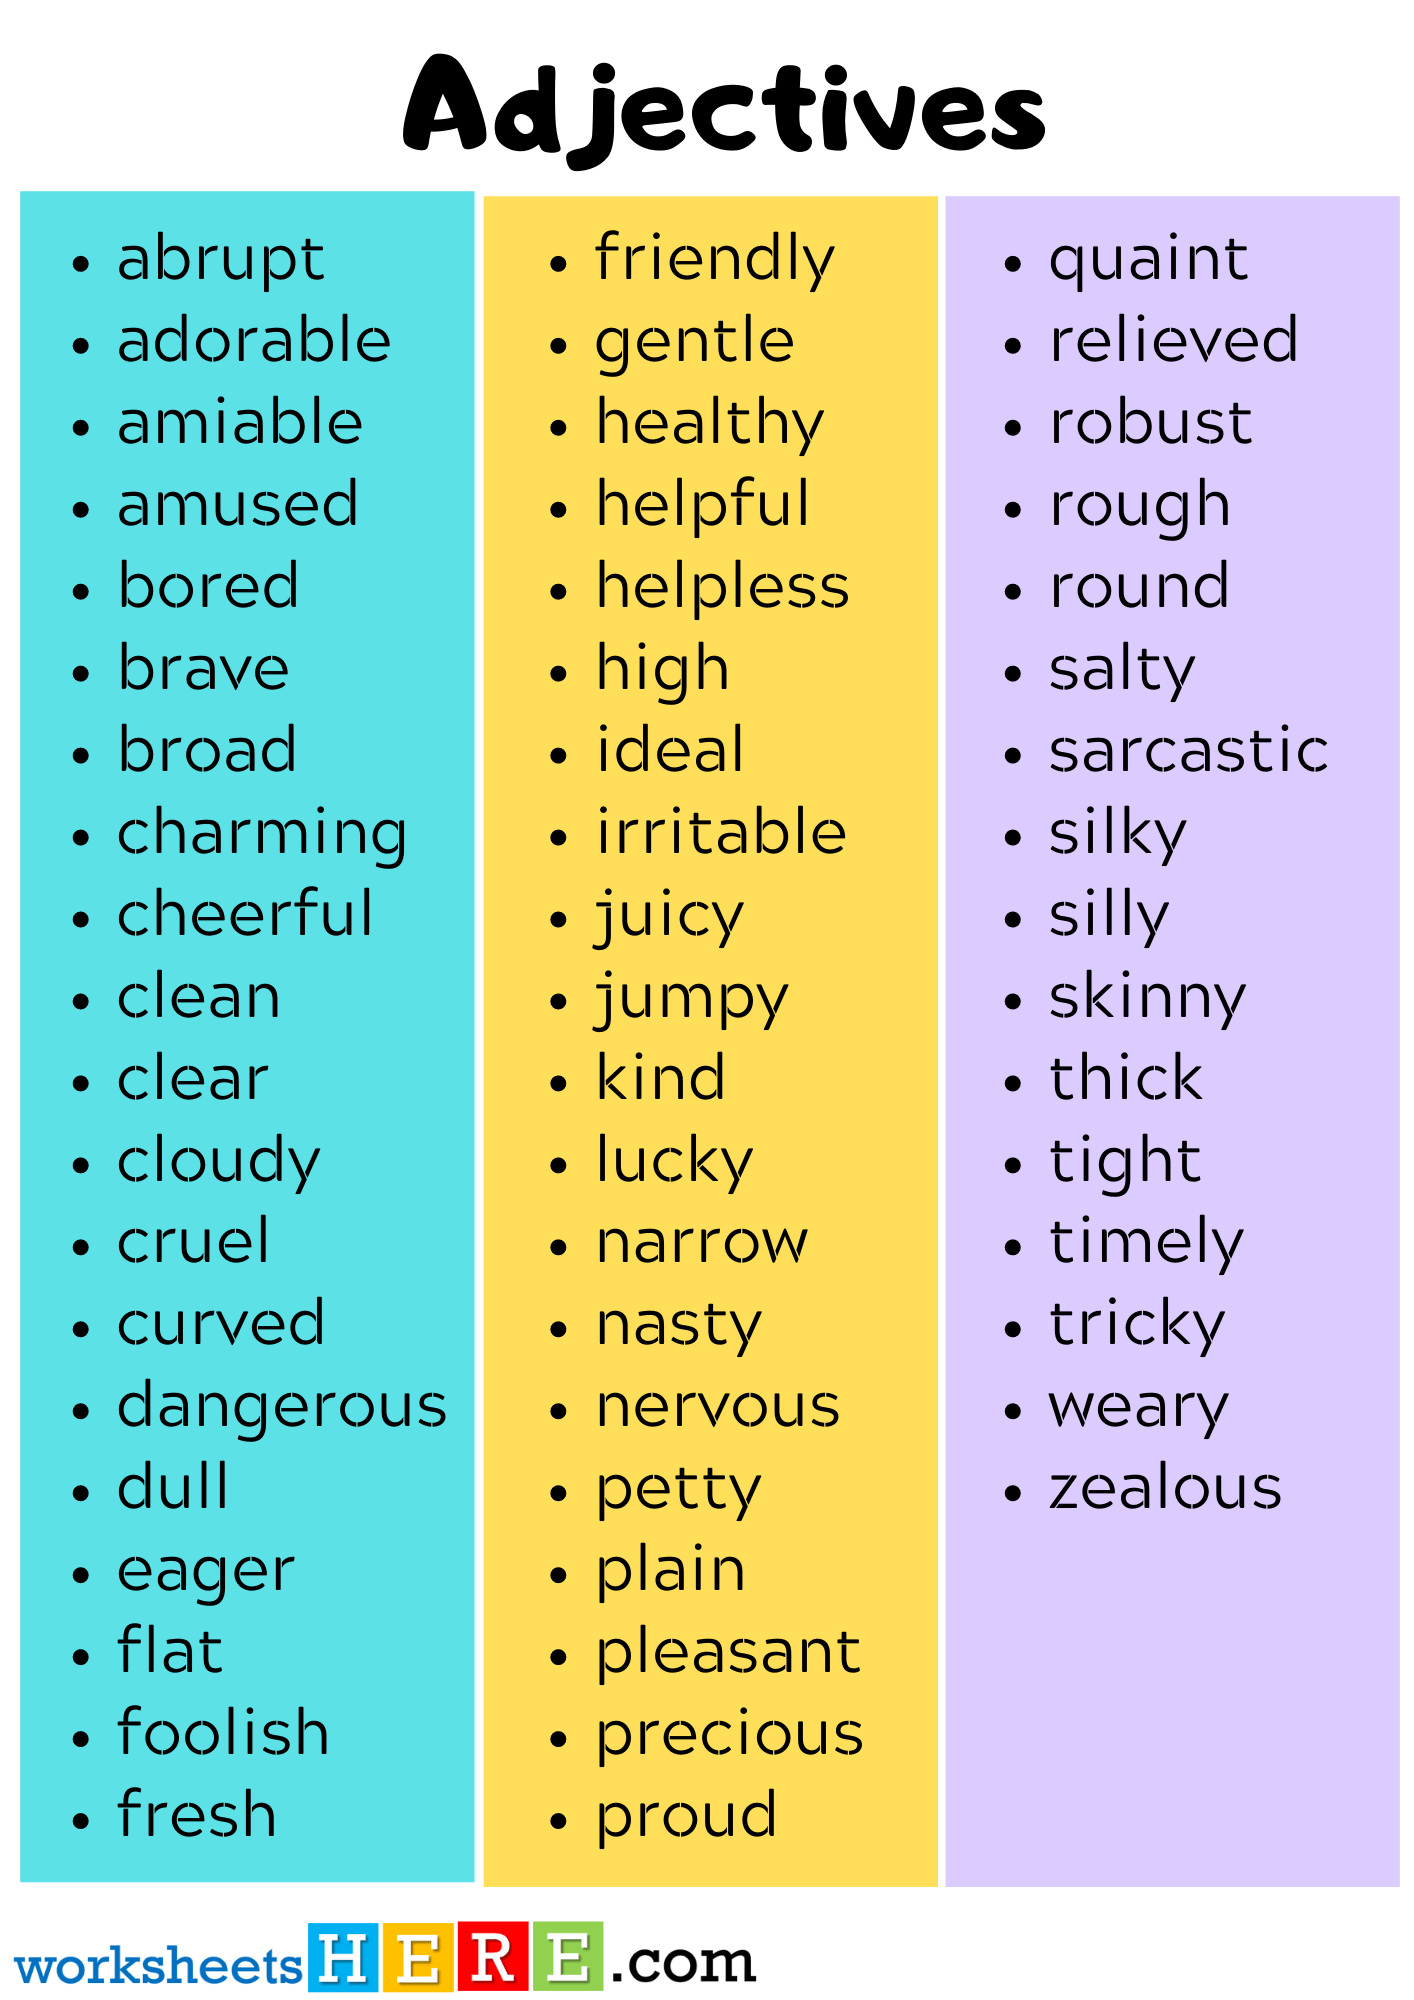 50 Common Adjectives List in English with PDF Worksheet